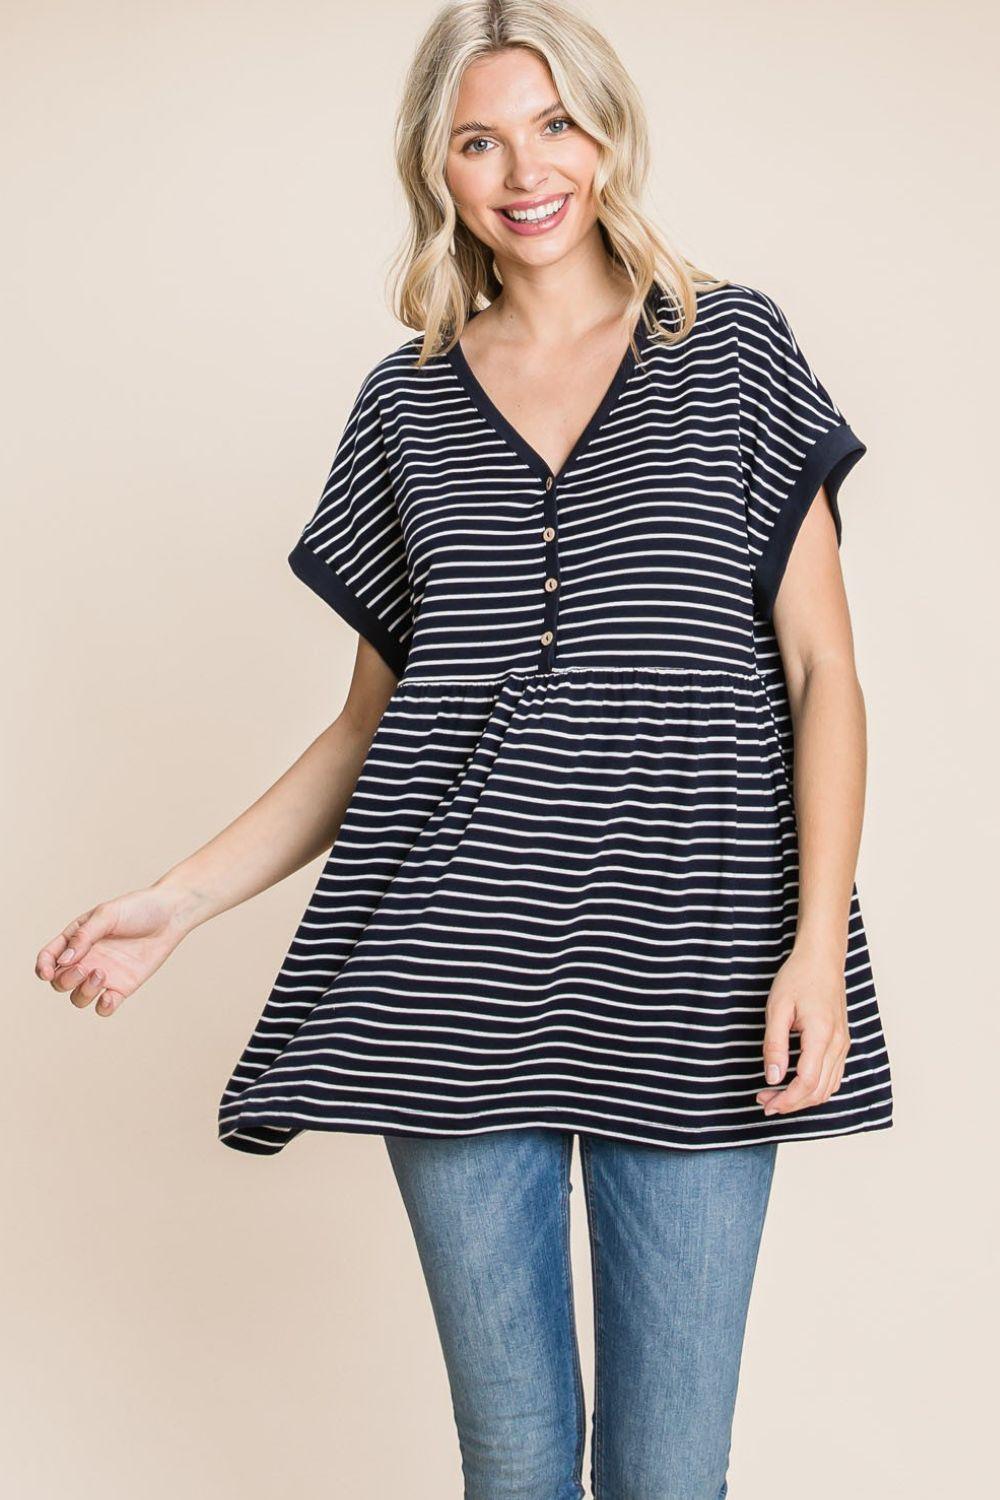 Cotton Bleu by Nu Label Striped Button Front Baby Doll Top - AMIClubwear